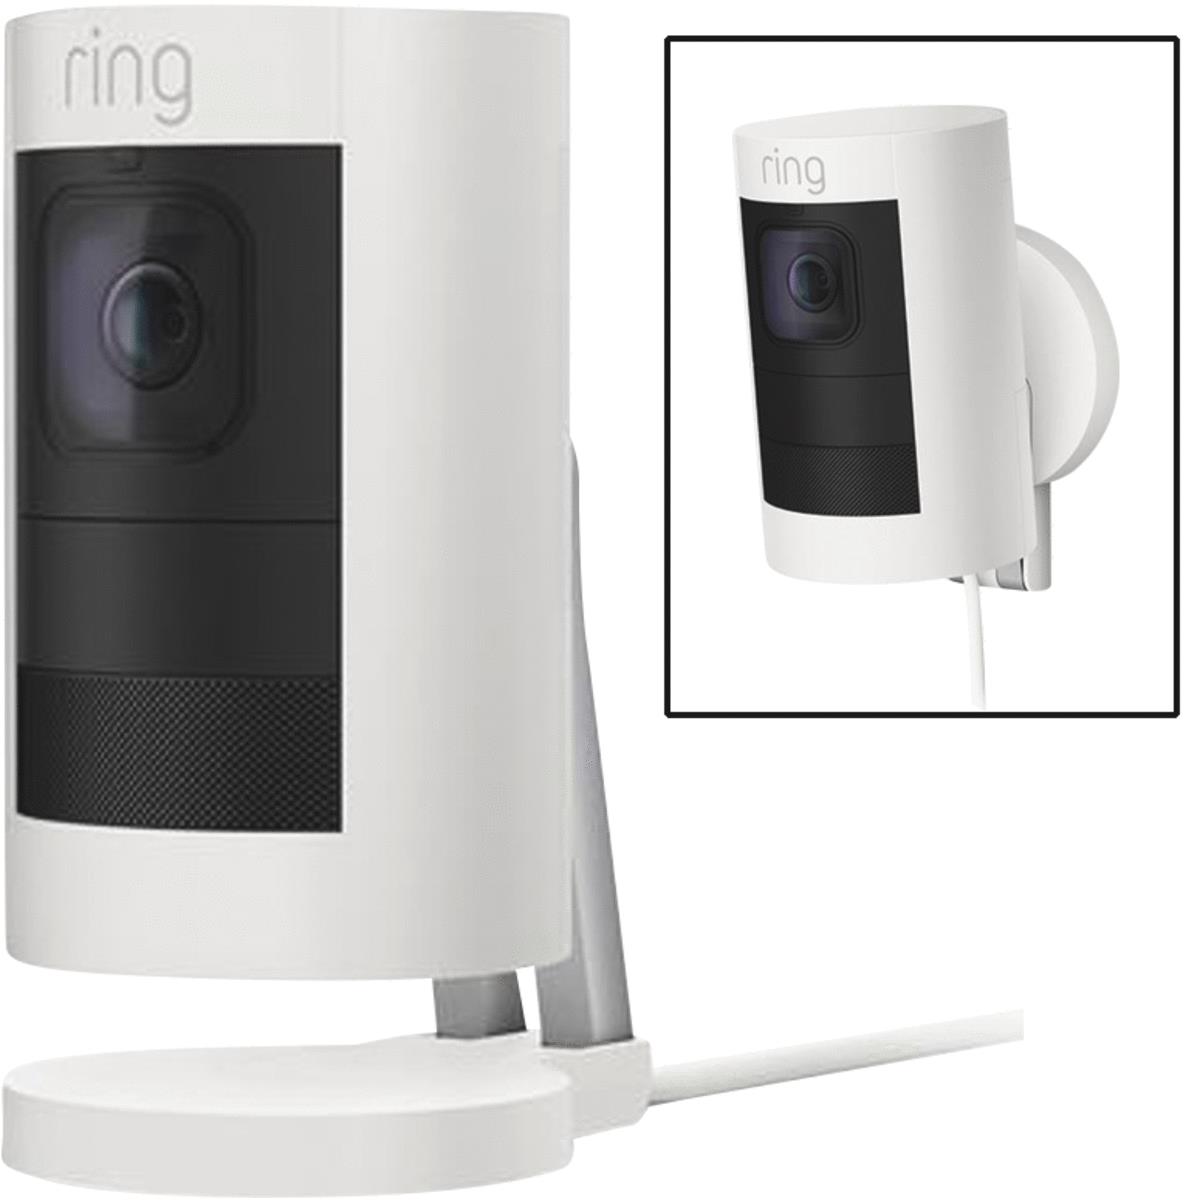 ring security camera system